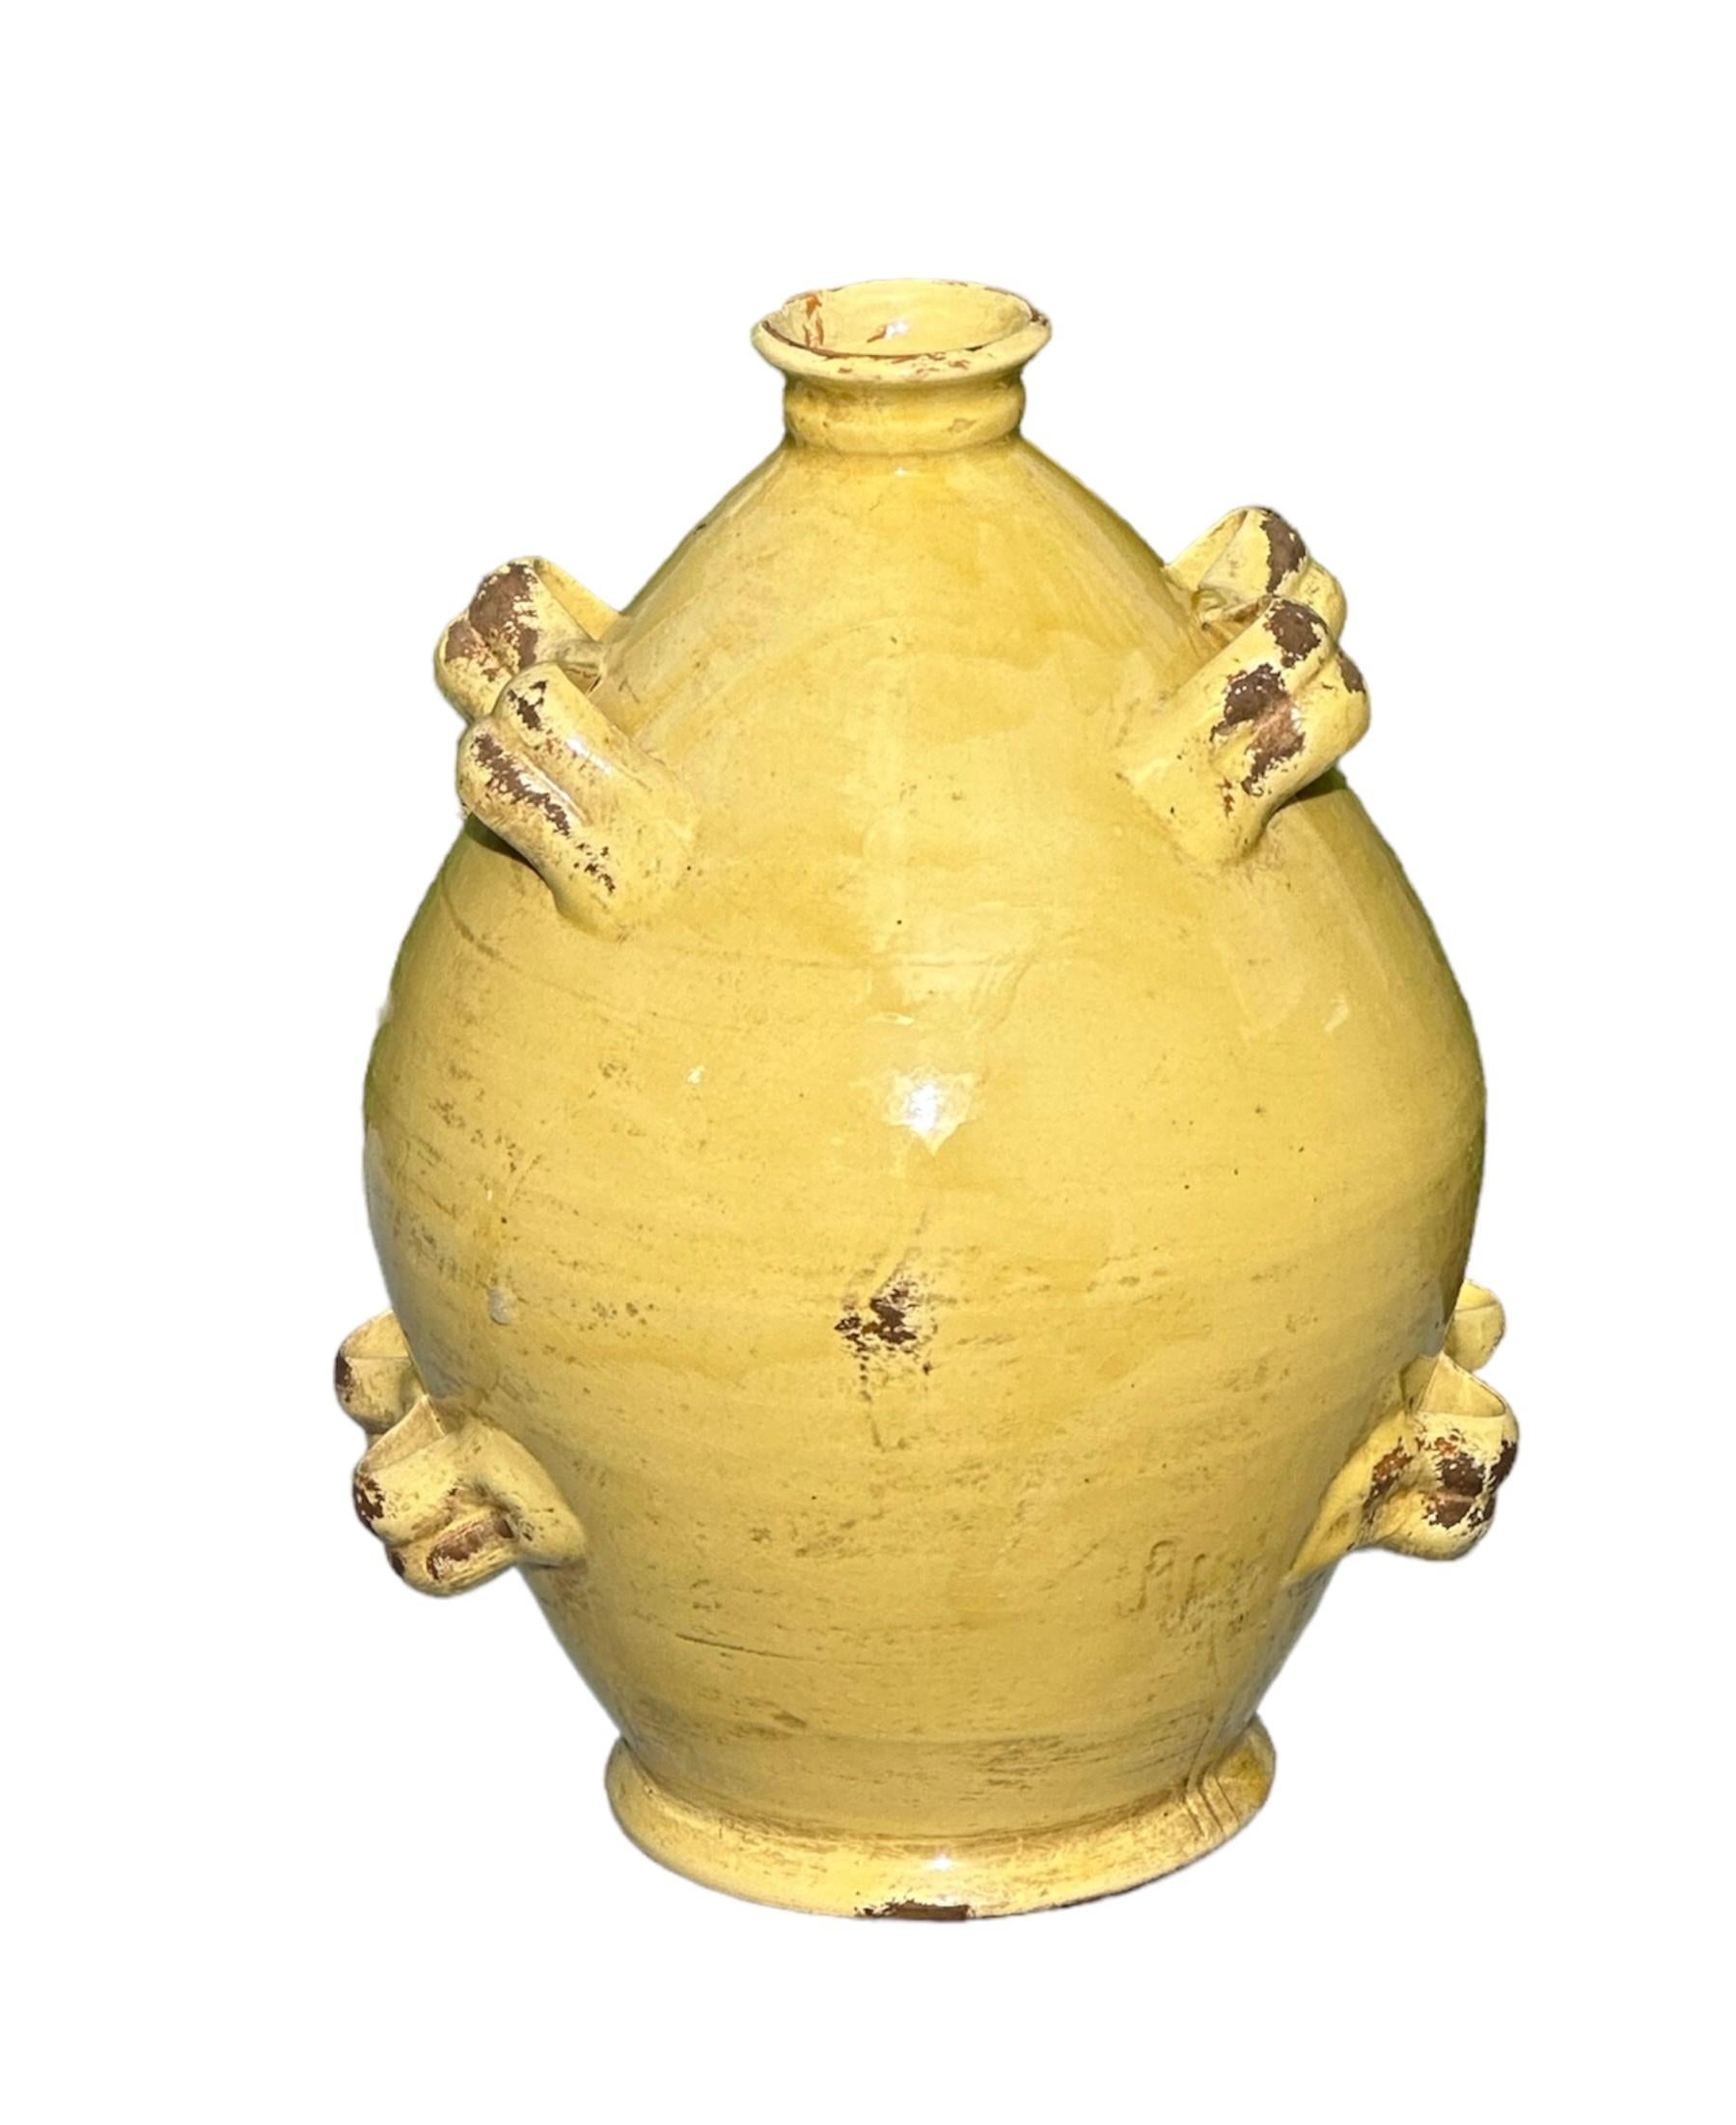 
A very unique jug with spout, the crest is what makes this earthly piece have such a regal feel. The patina is charming and the glaze looks like glass, so there’s two different feelings to the touch. It’s heavy and weight 

The color in the